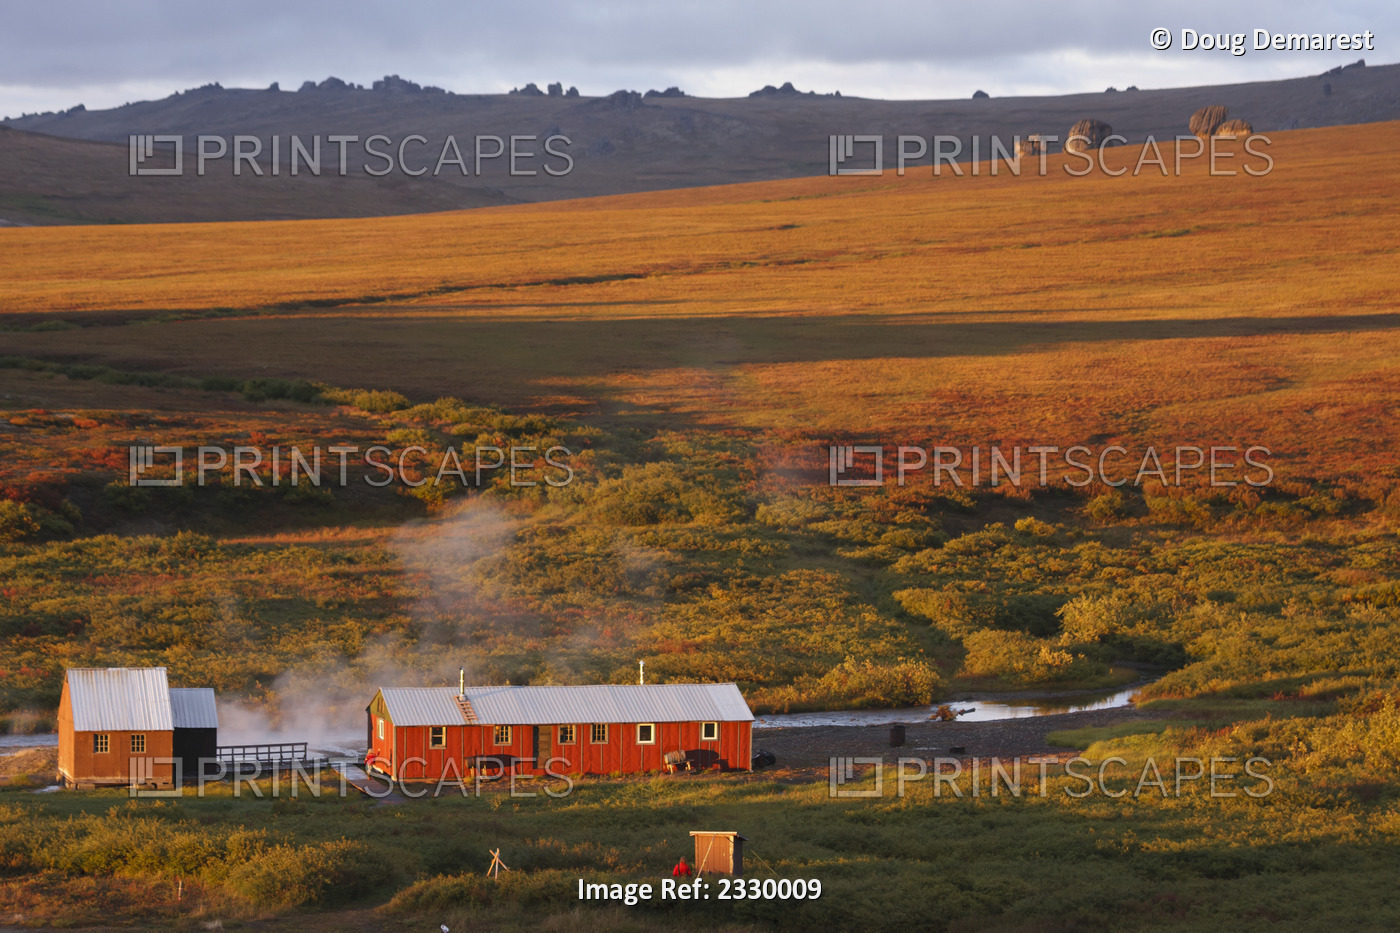 Bathhouse And Public Shelter At Serpentine Hot Springs And Fall Color On The ...